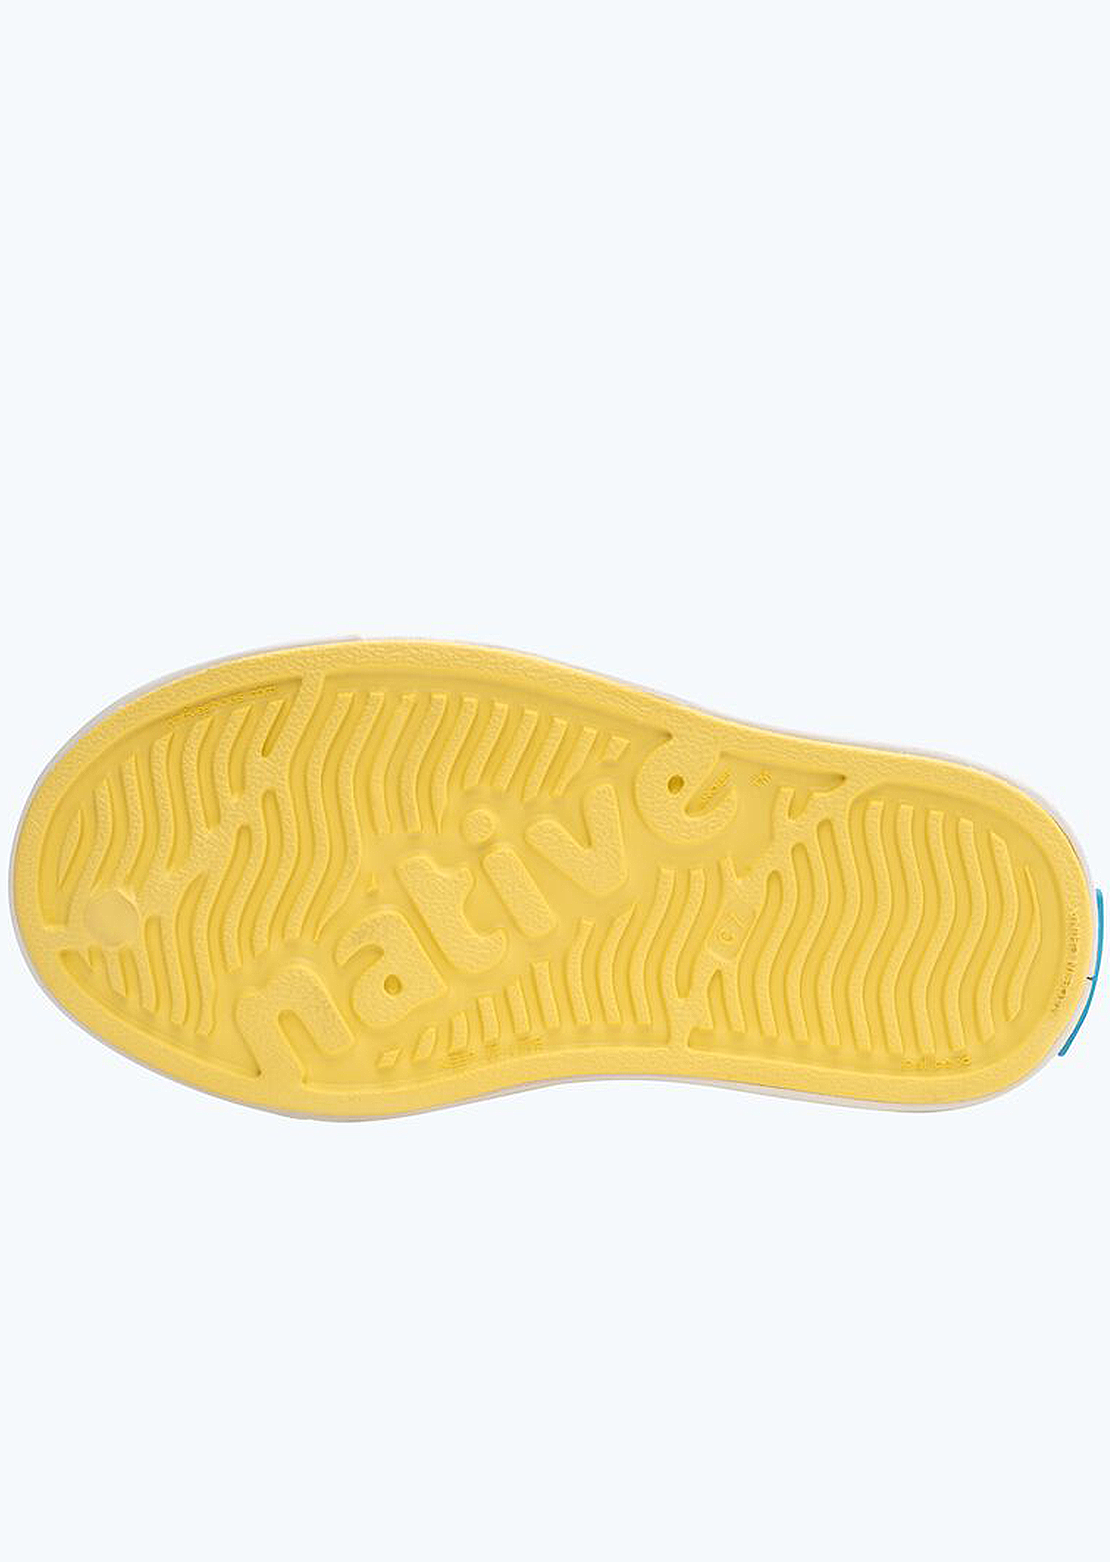 Native Toddler Jefferson Shoes Gone Bananas Yellow/ Shell White